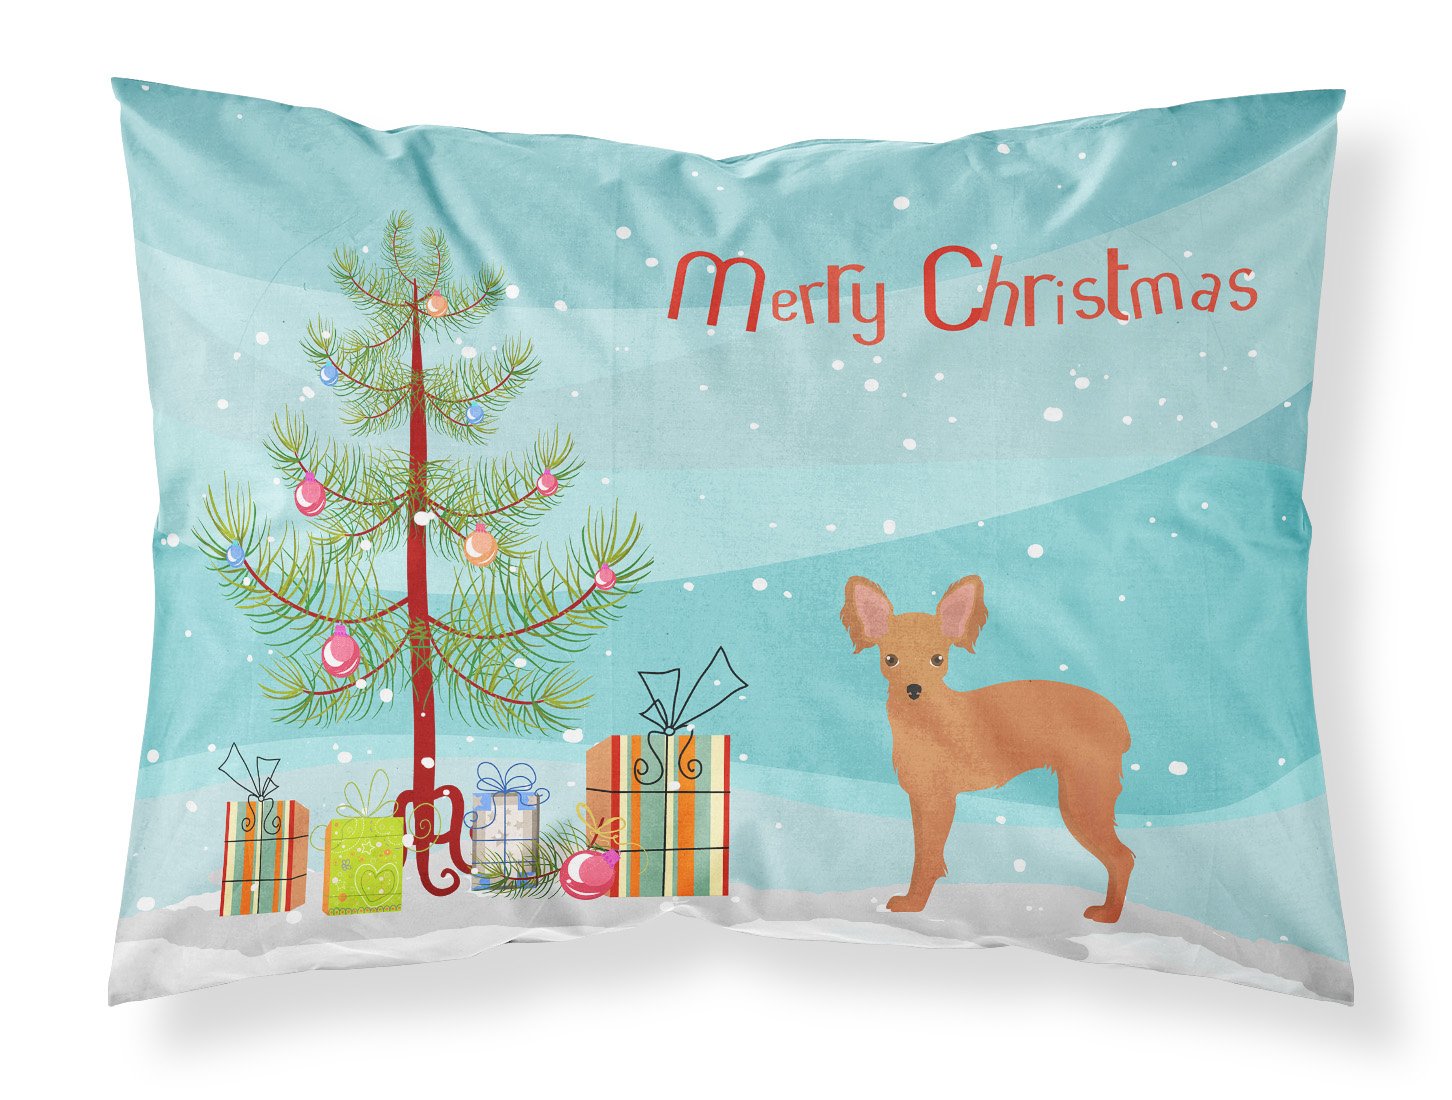 Russkiy Toy or Russian Toy Terrier Christmas Tree Fabric Standard Pillowcase CK3484PILLOWCASE by Caroline's Treasures